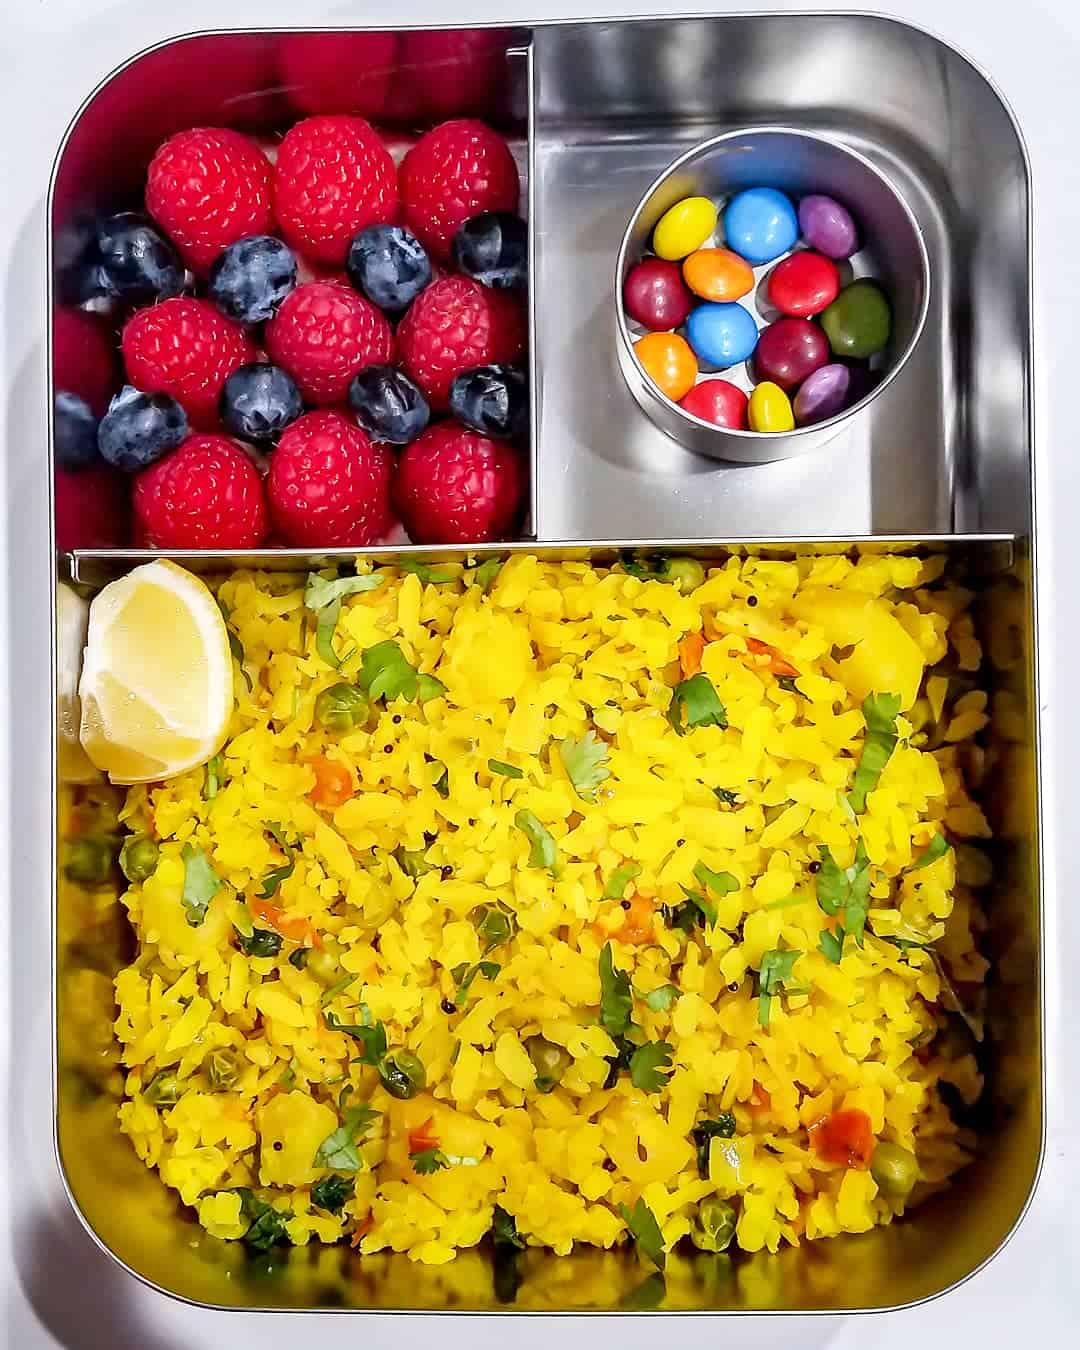 Poha, raspberries and blueberries and chocolate drops